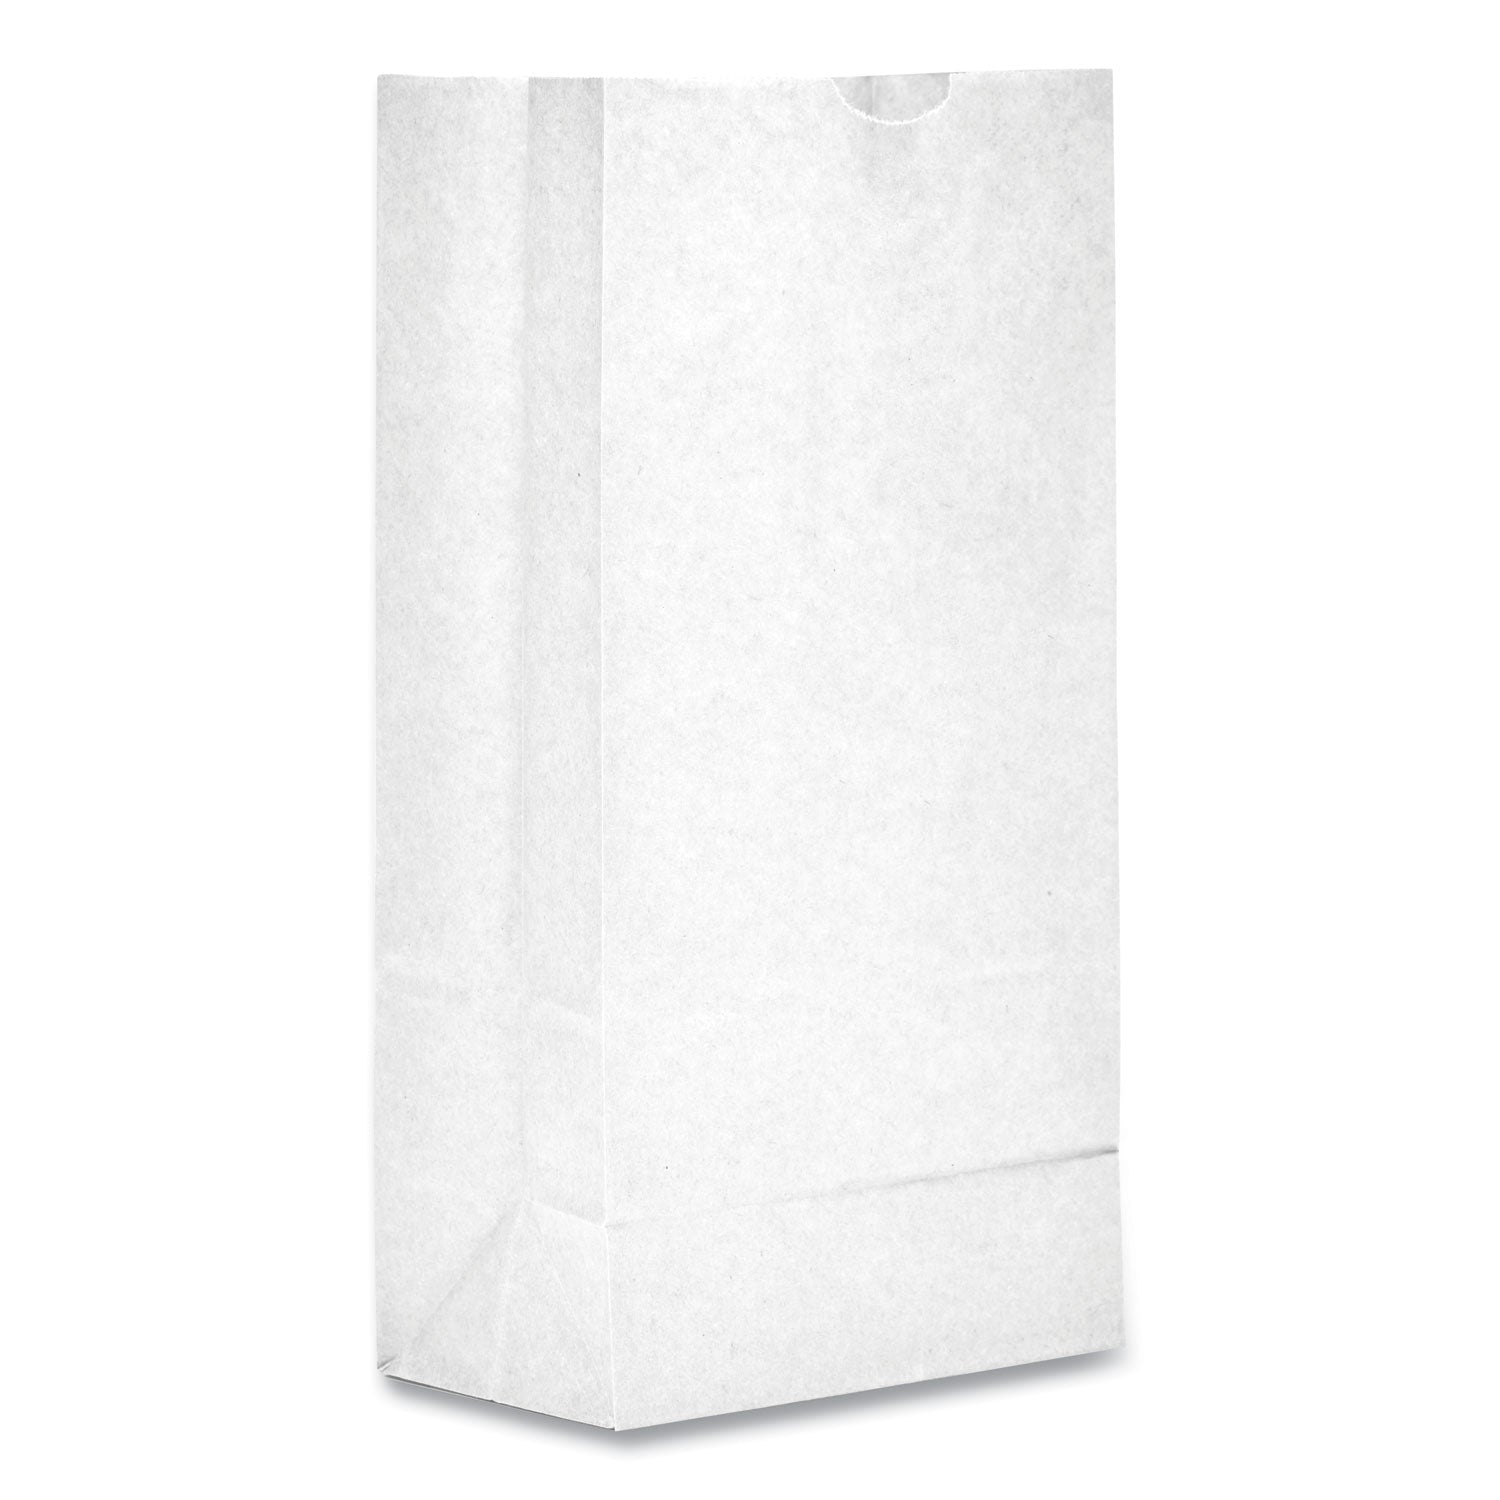 grocery-paper-bags-30-lb-capacity-#2-431-x-244-x-788-white-500-bags_baggw2500 - 2